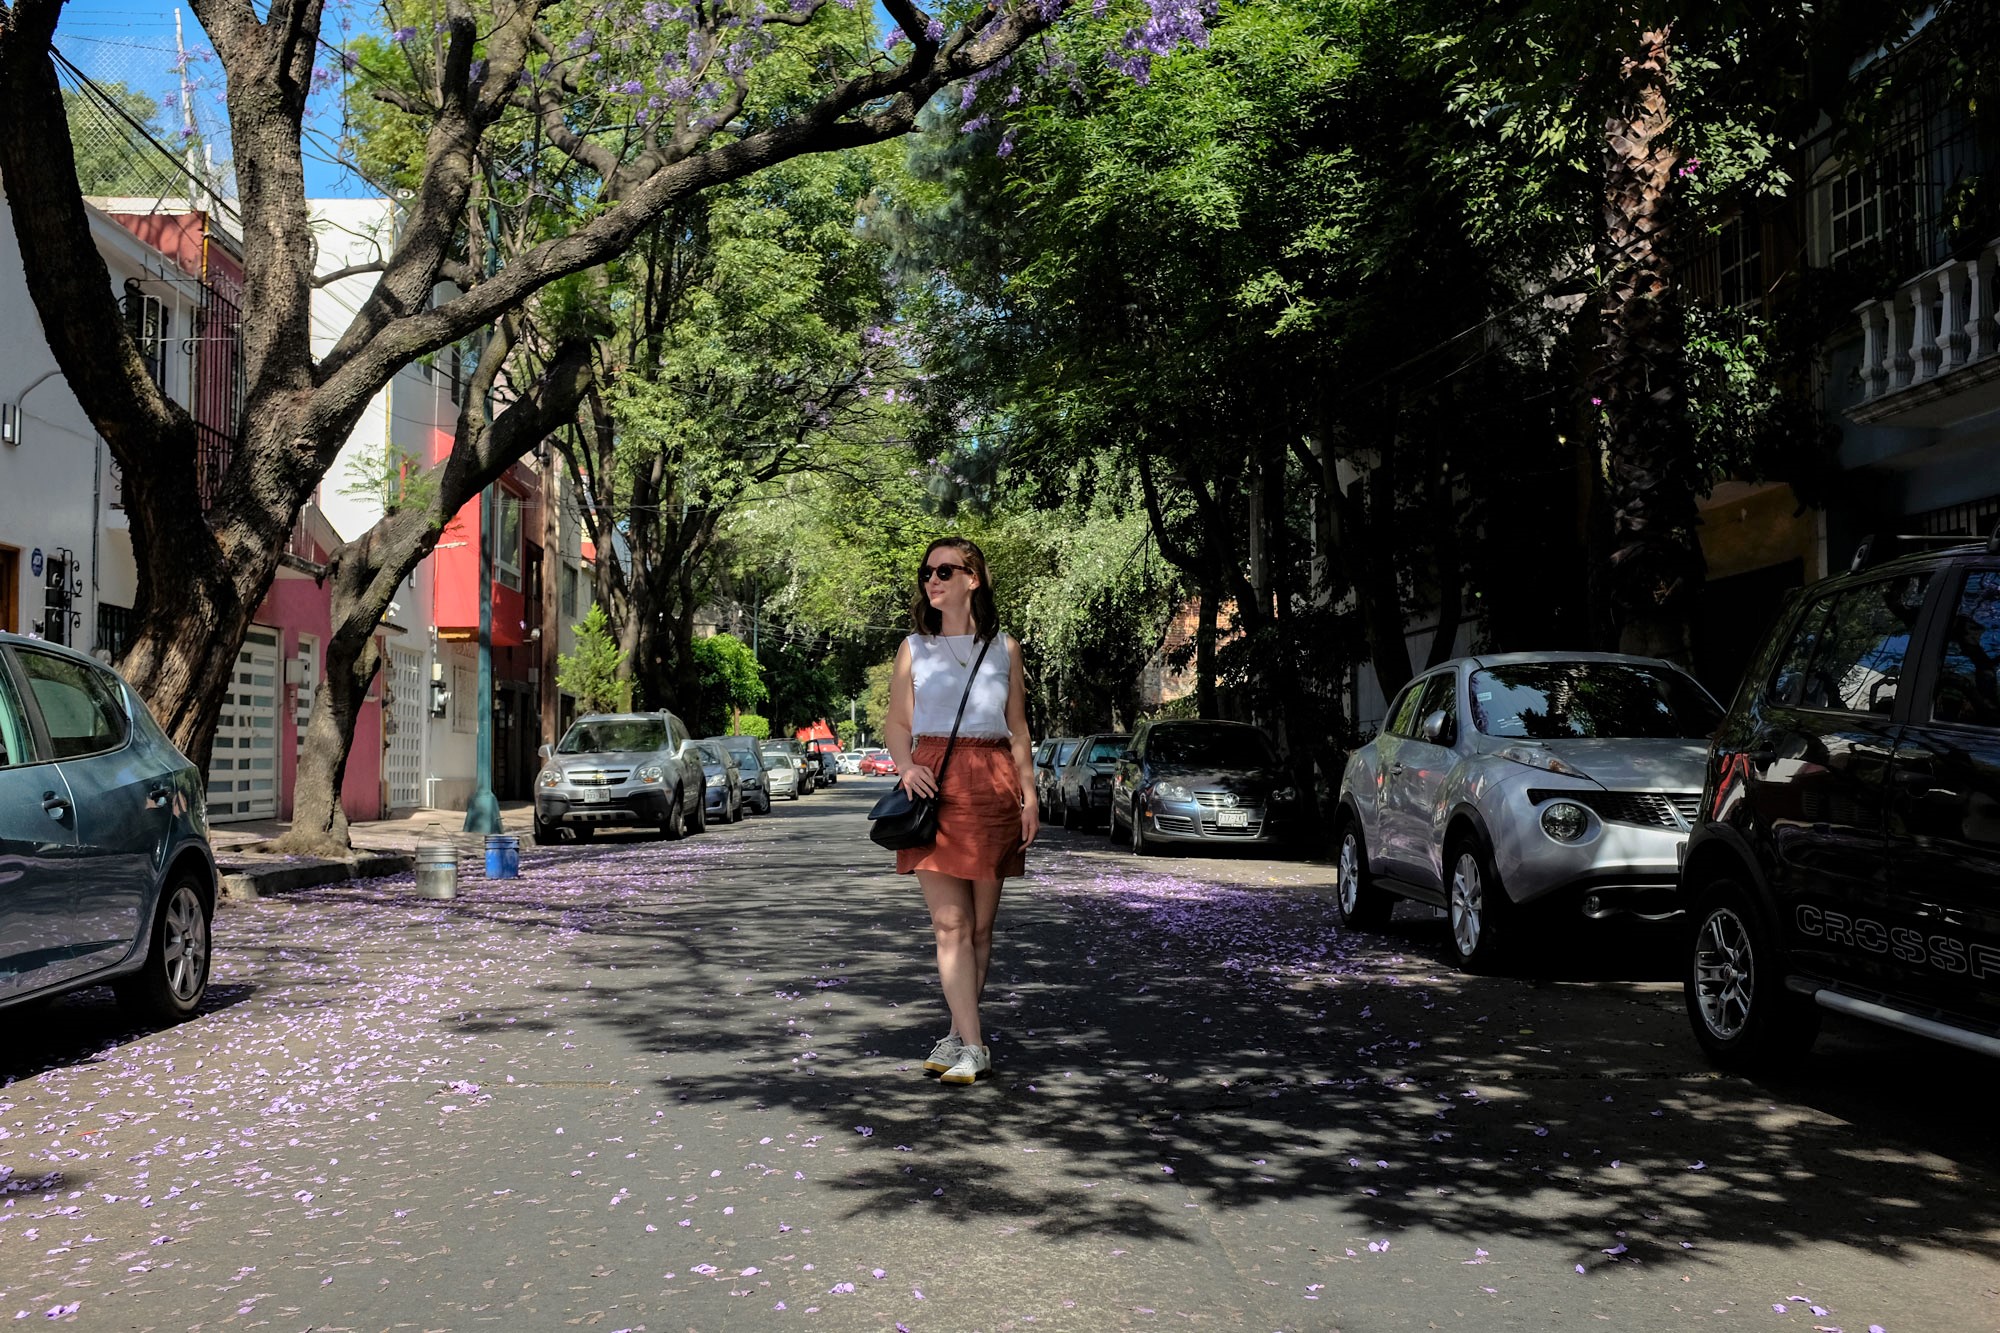 Krystal walking down a street in mexico city wearing a white tank, rust skirt, and white sneakers